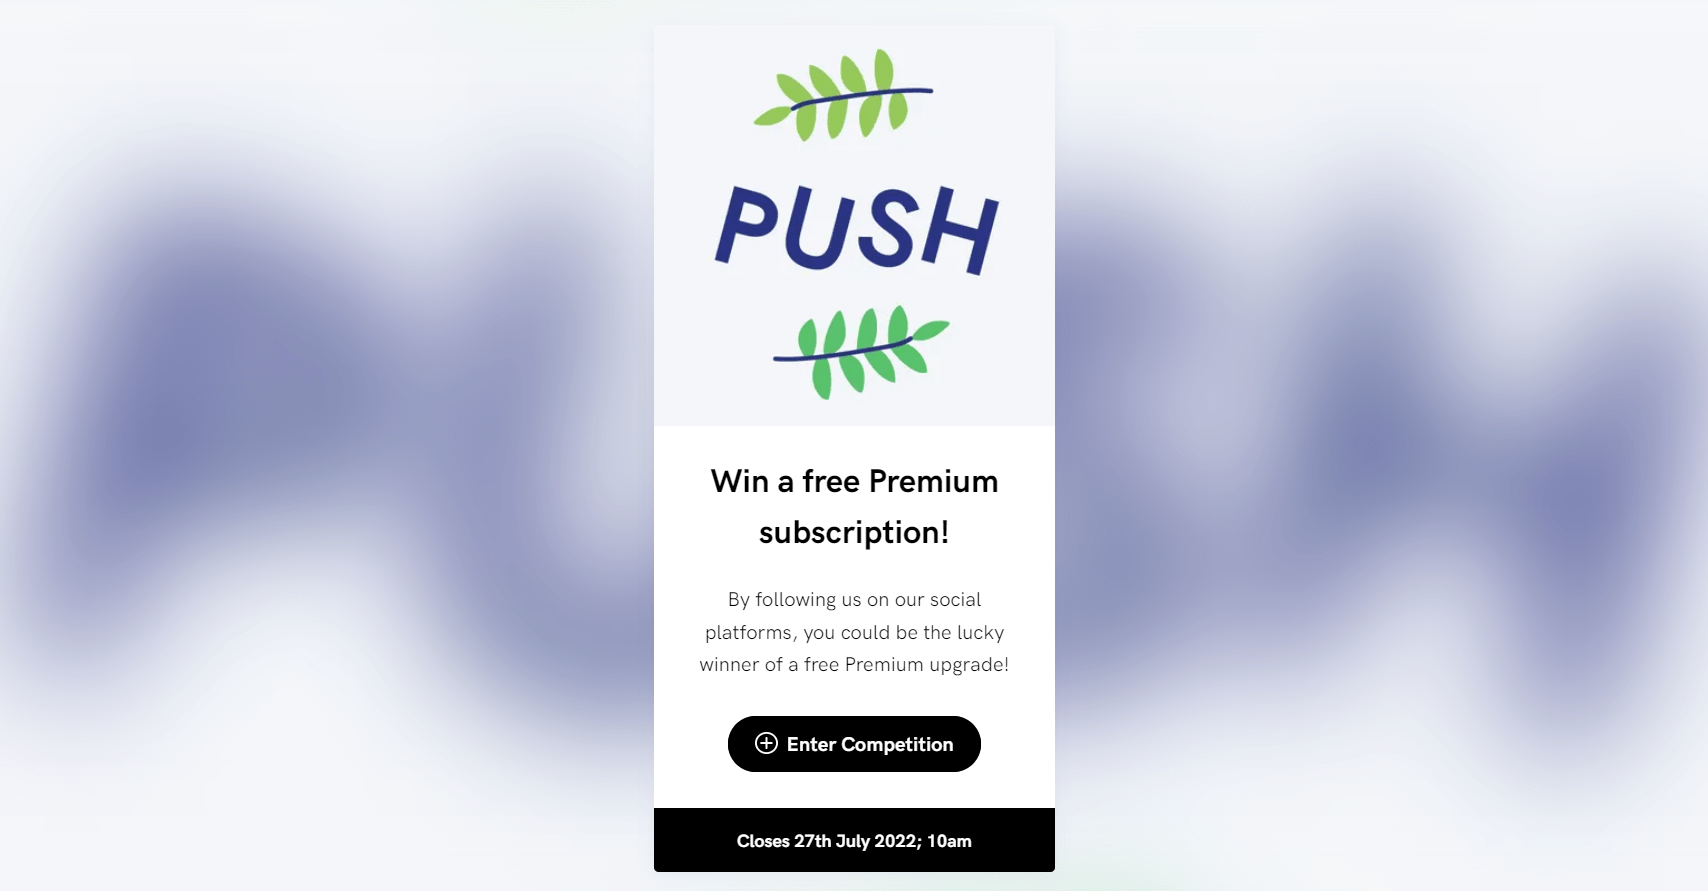 Competition example GIF. Blurred "PUSH" written in blue sat against a white background. In the foreground there is a white vertical rectangle with PUSH.fm's logo, writing about the competition and then a call-to-action button allowing you to enter the contest.